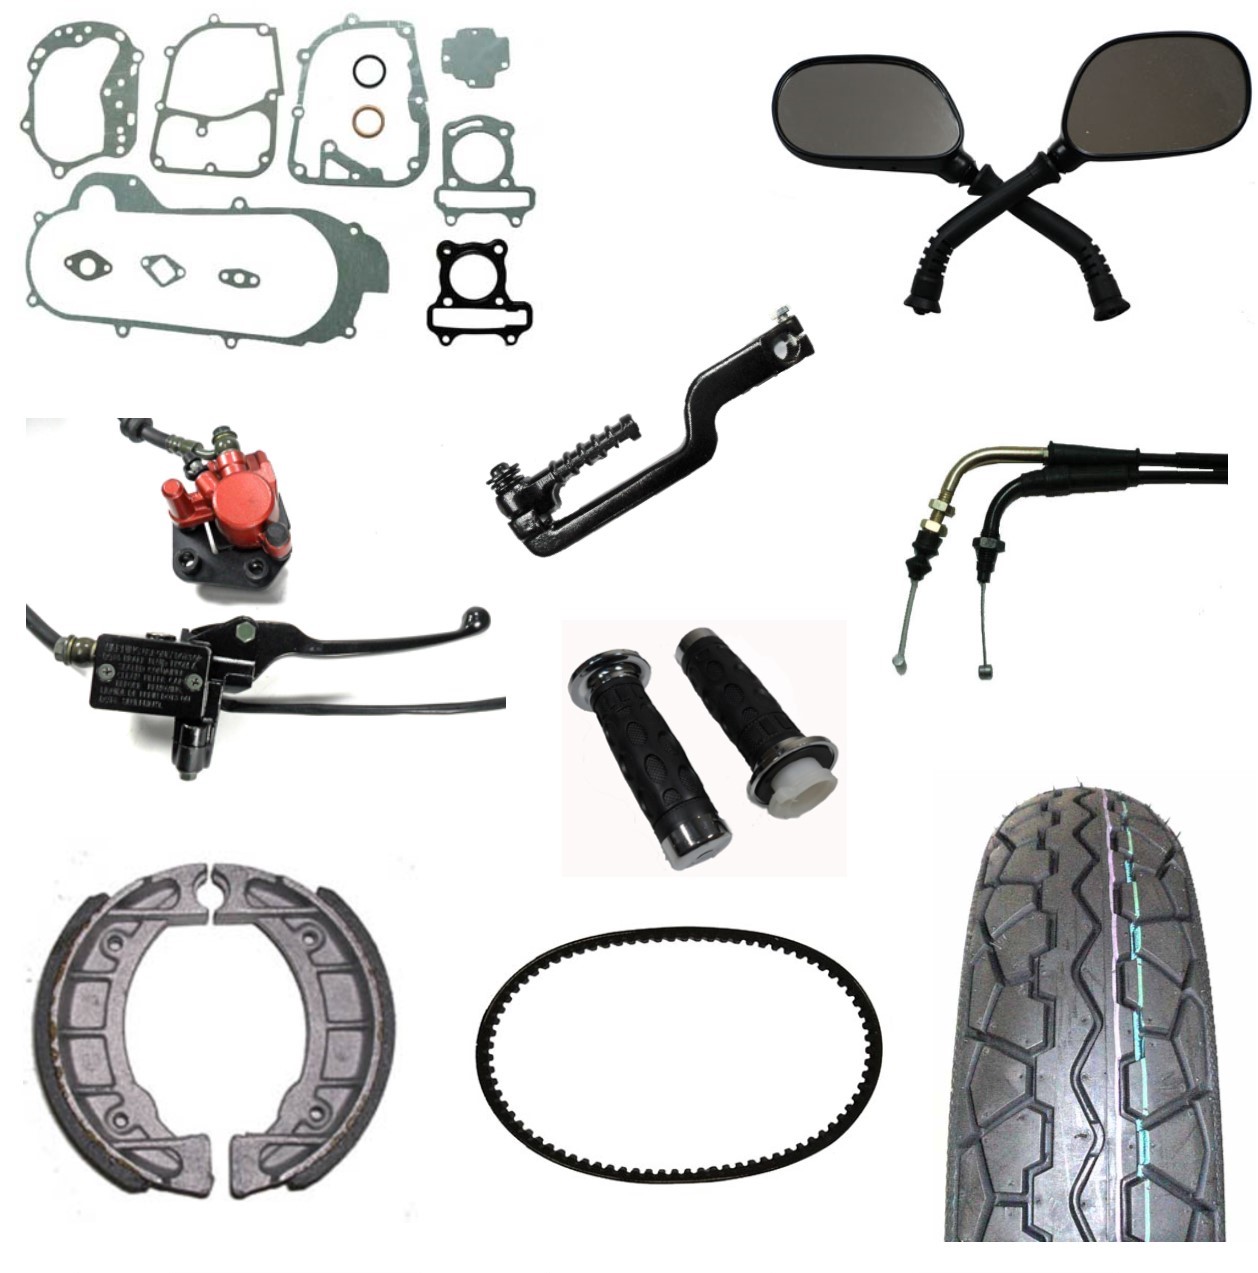 Other Commonly Needed Parts